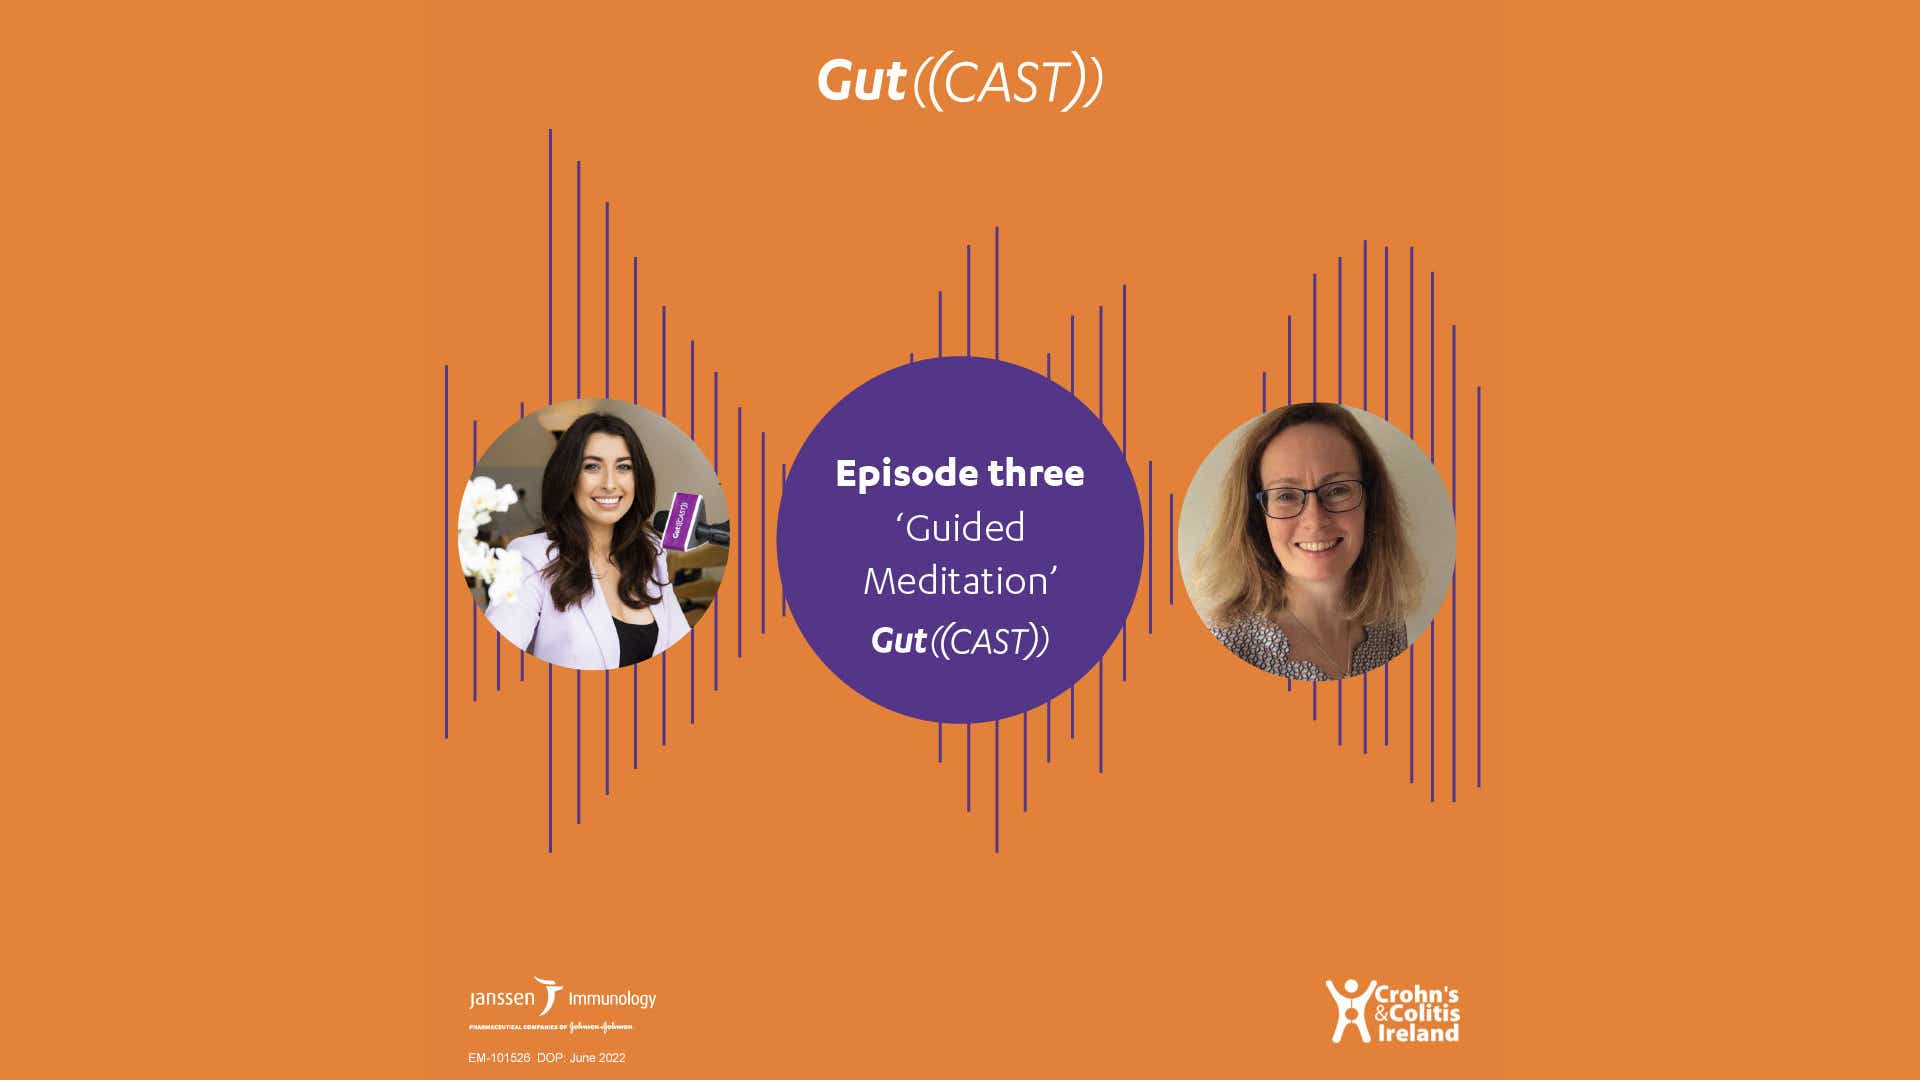 Season two episode three of the Gutcast series named "Guided Meditation".